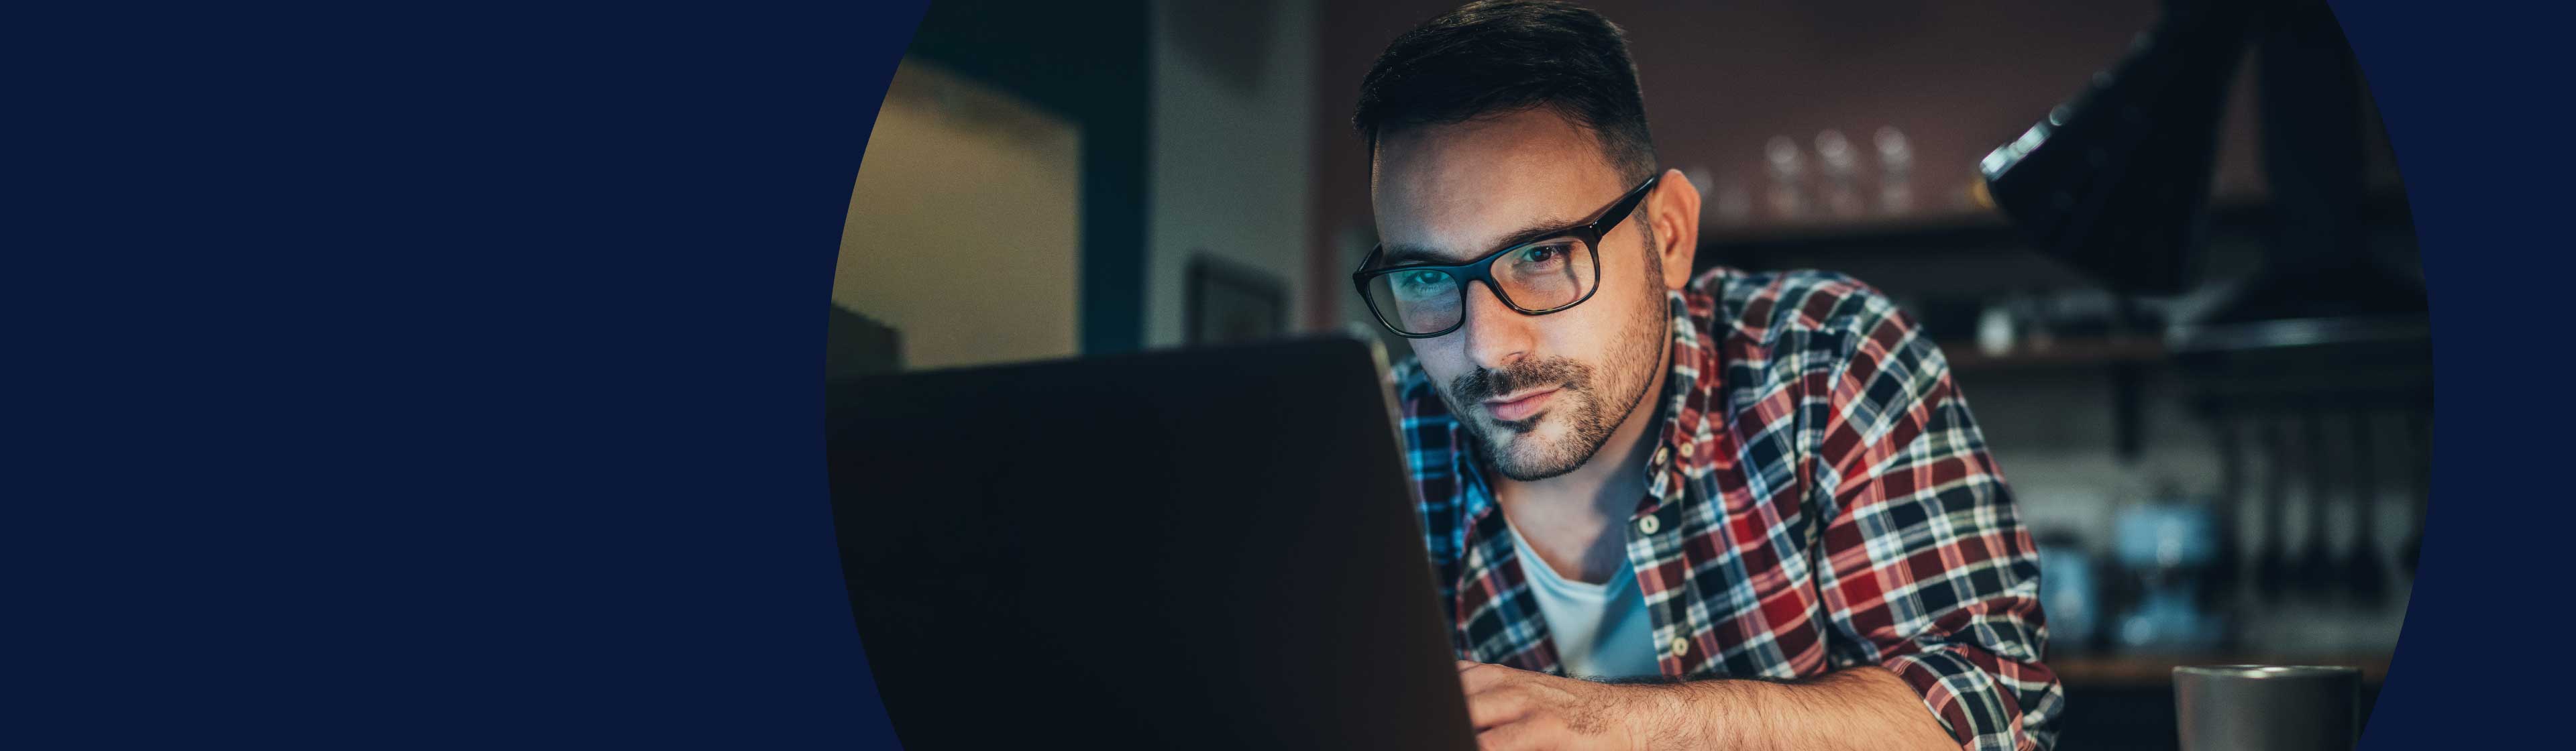 A man with glasses using a laptop